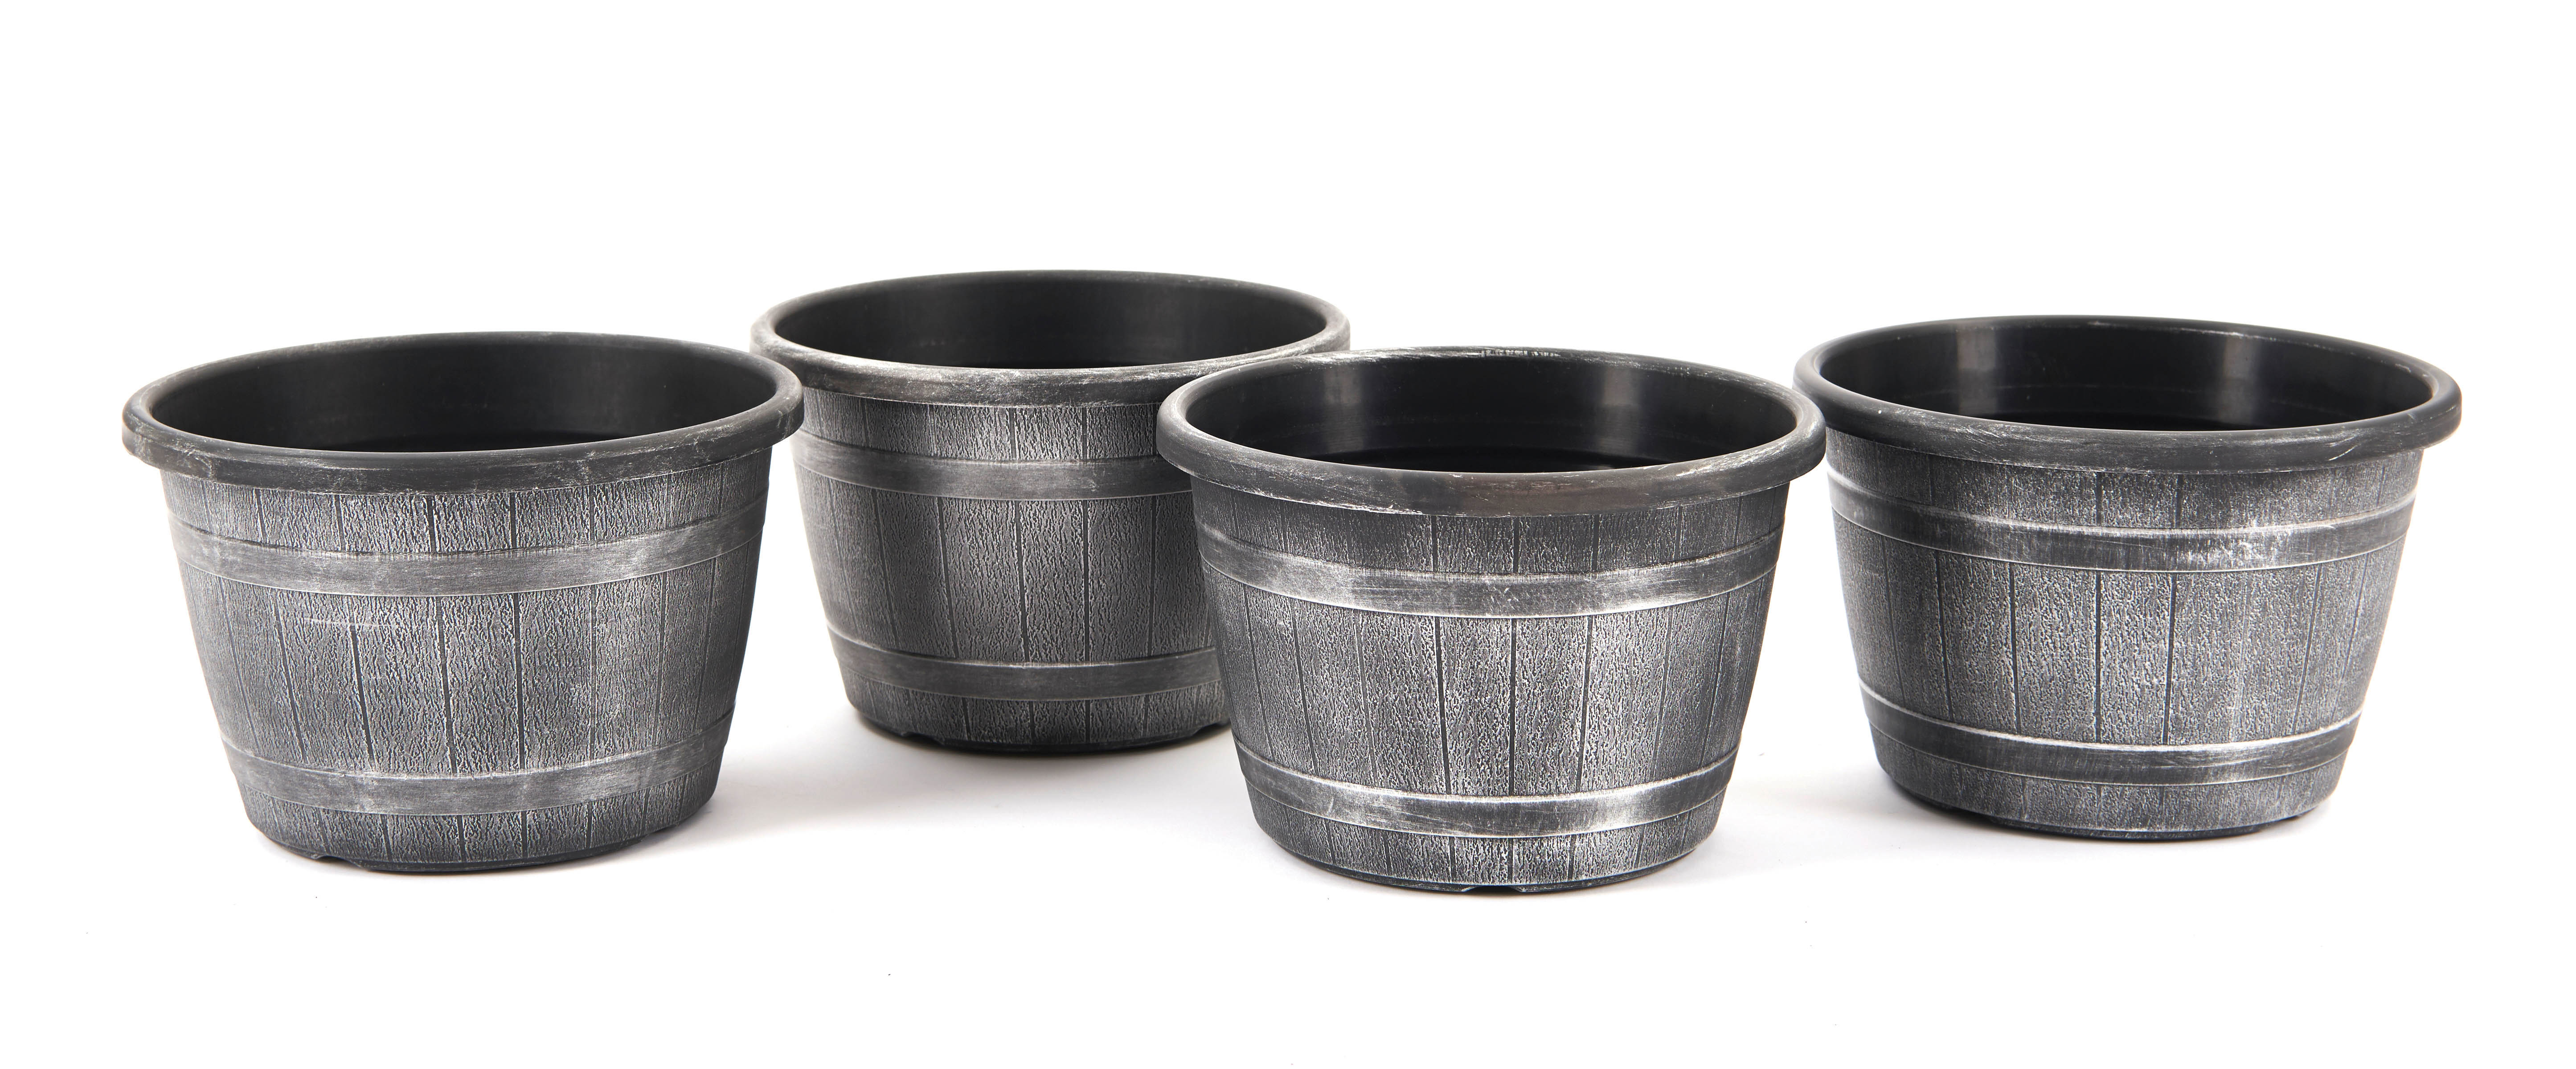 Gablemere Pk of 4 Wood Effect Planters